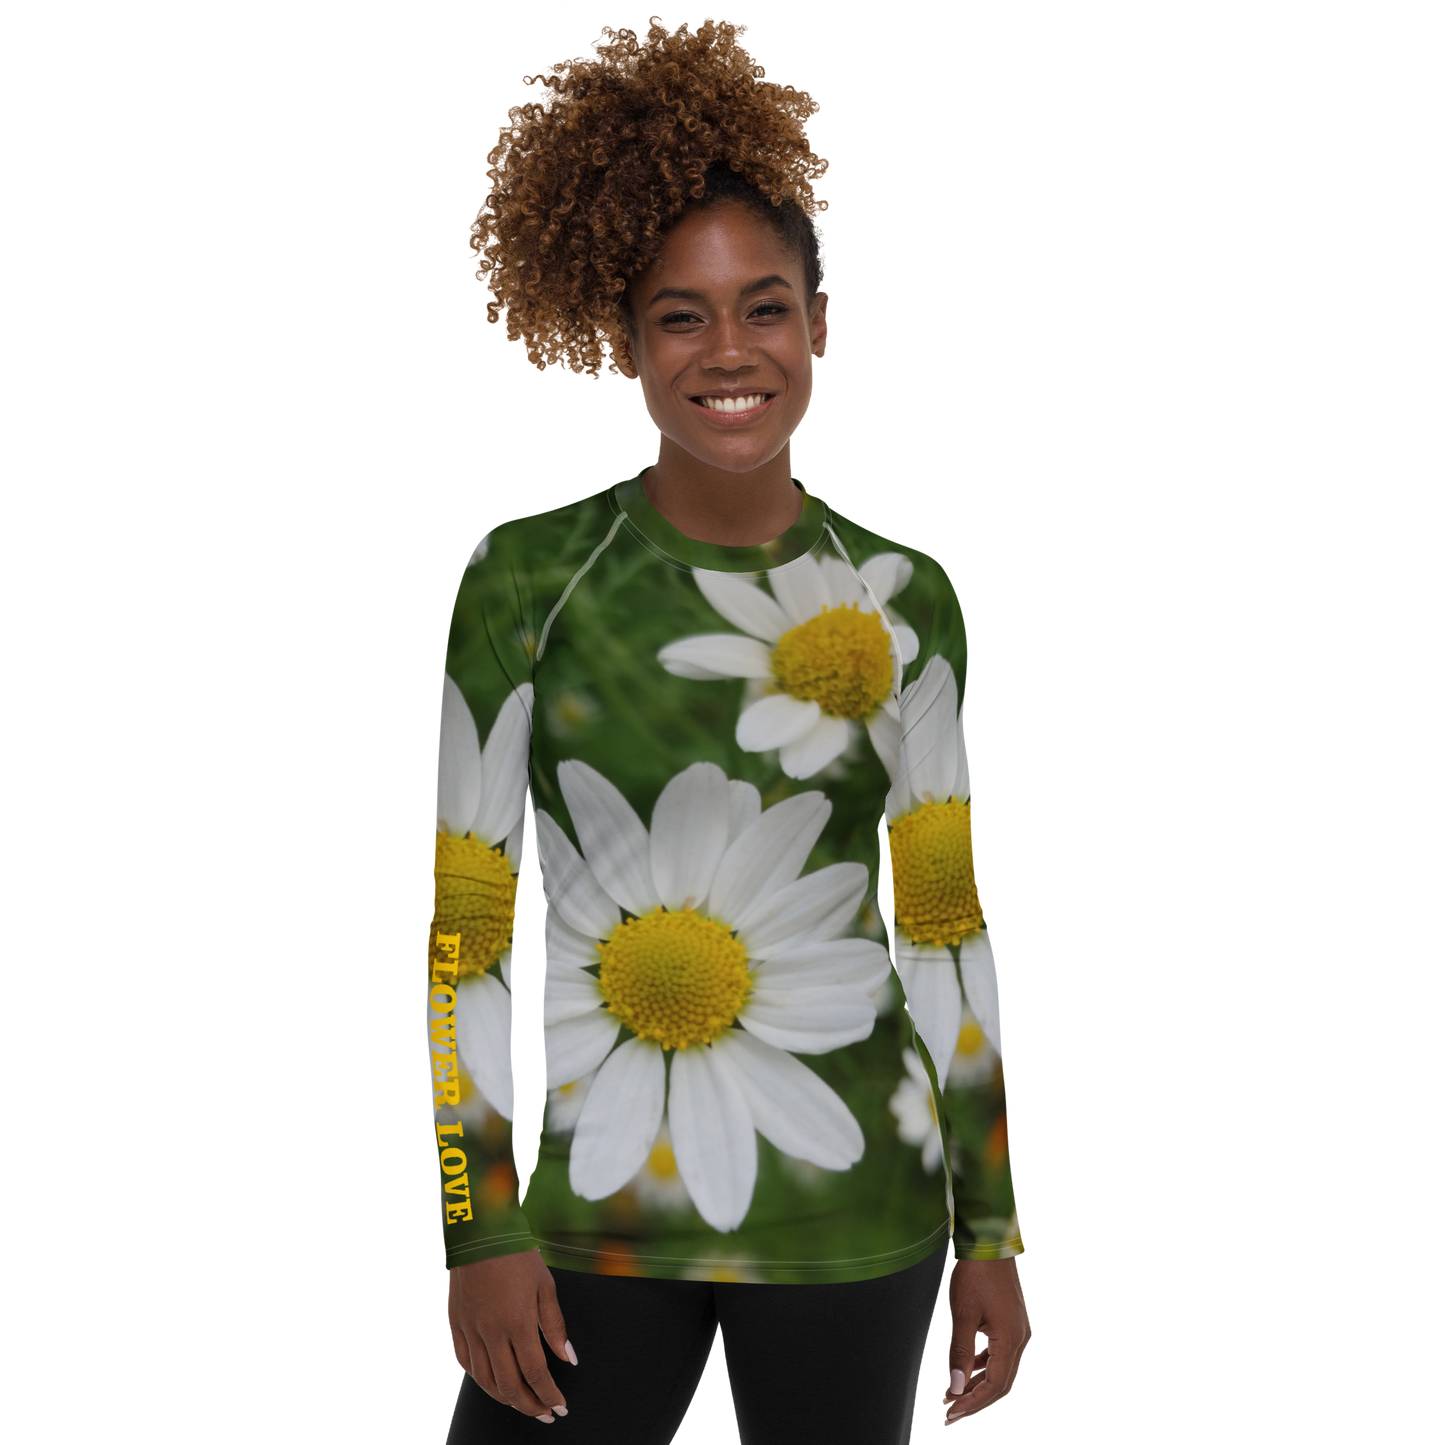 The FLOWER LOVE Collection - "Daisy Daydreams" Design Luxurious Women's Rash Guard, Sun Protective Clothing, Sports & Fitness Clothing